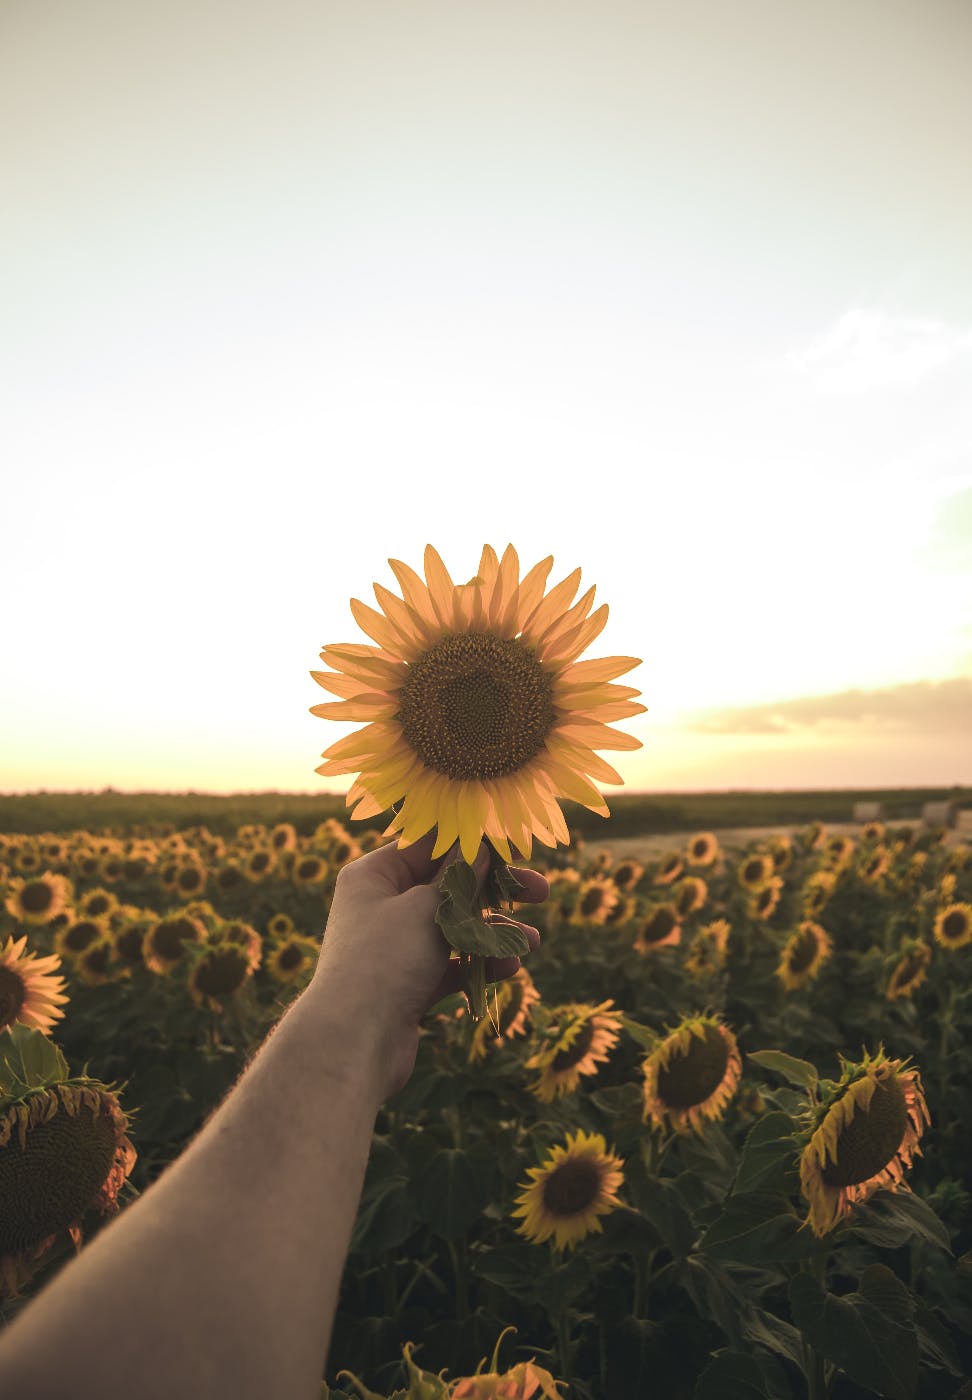 A arm holding a sunflower in front of a field of sunflowers